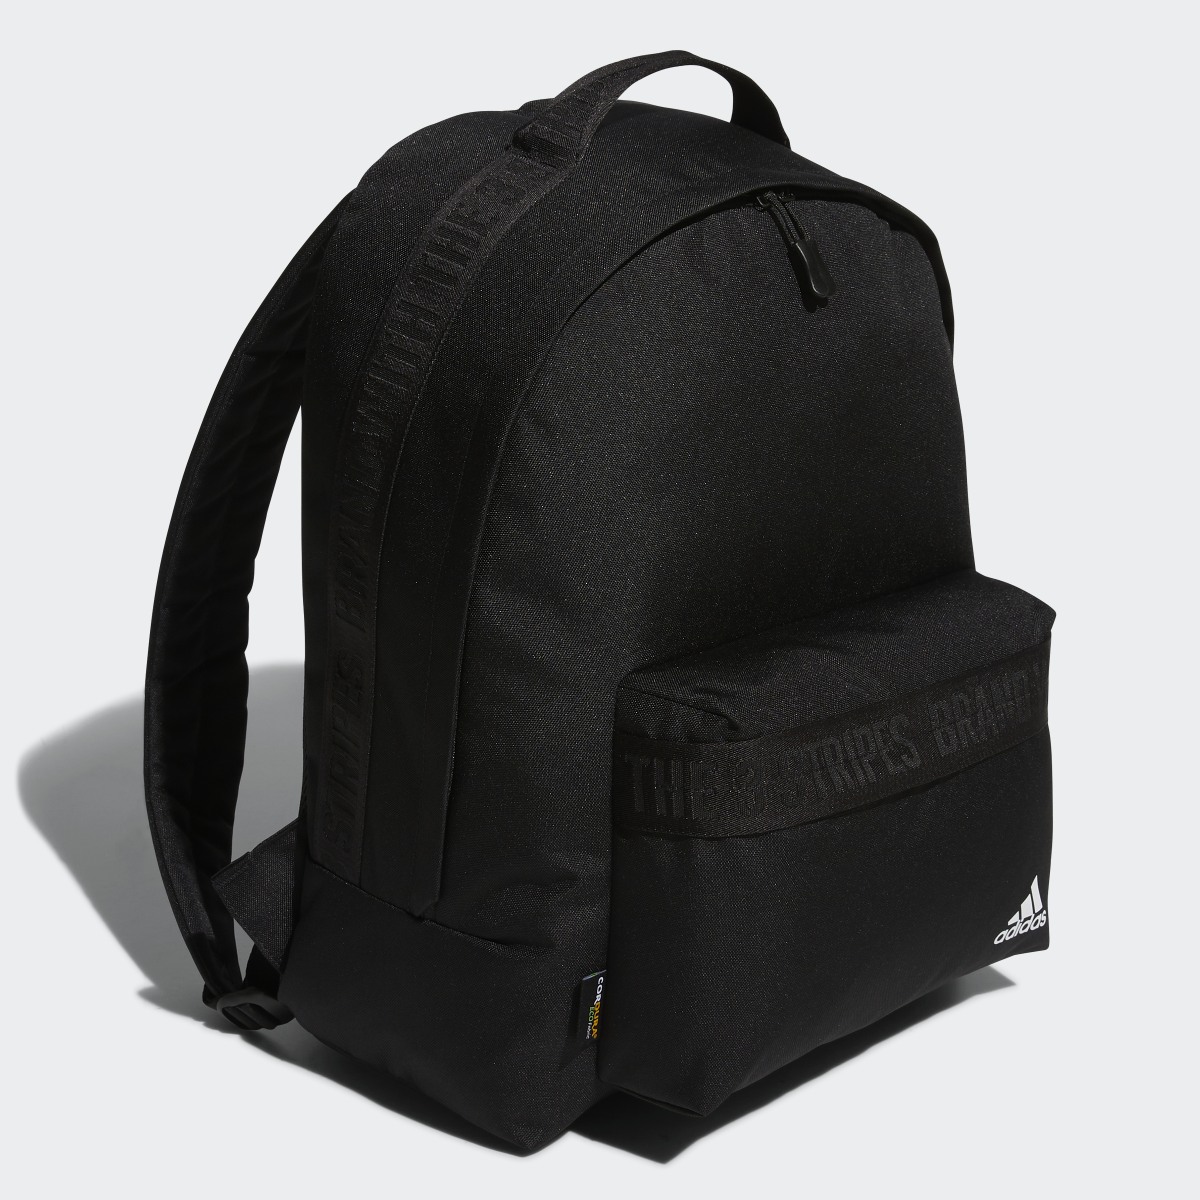 Adidas Must Haves Backpack. 4